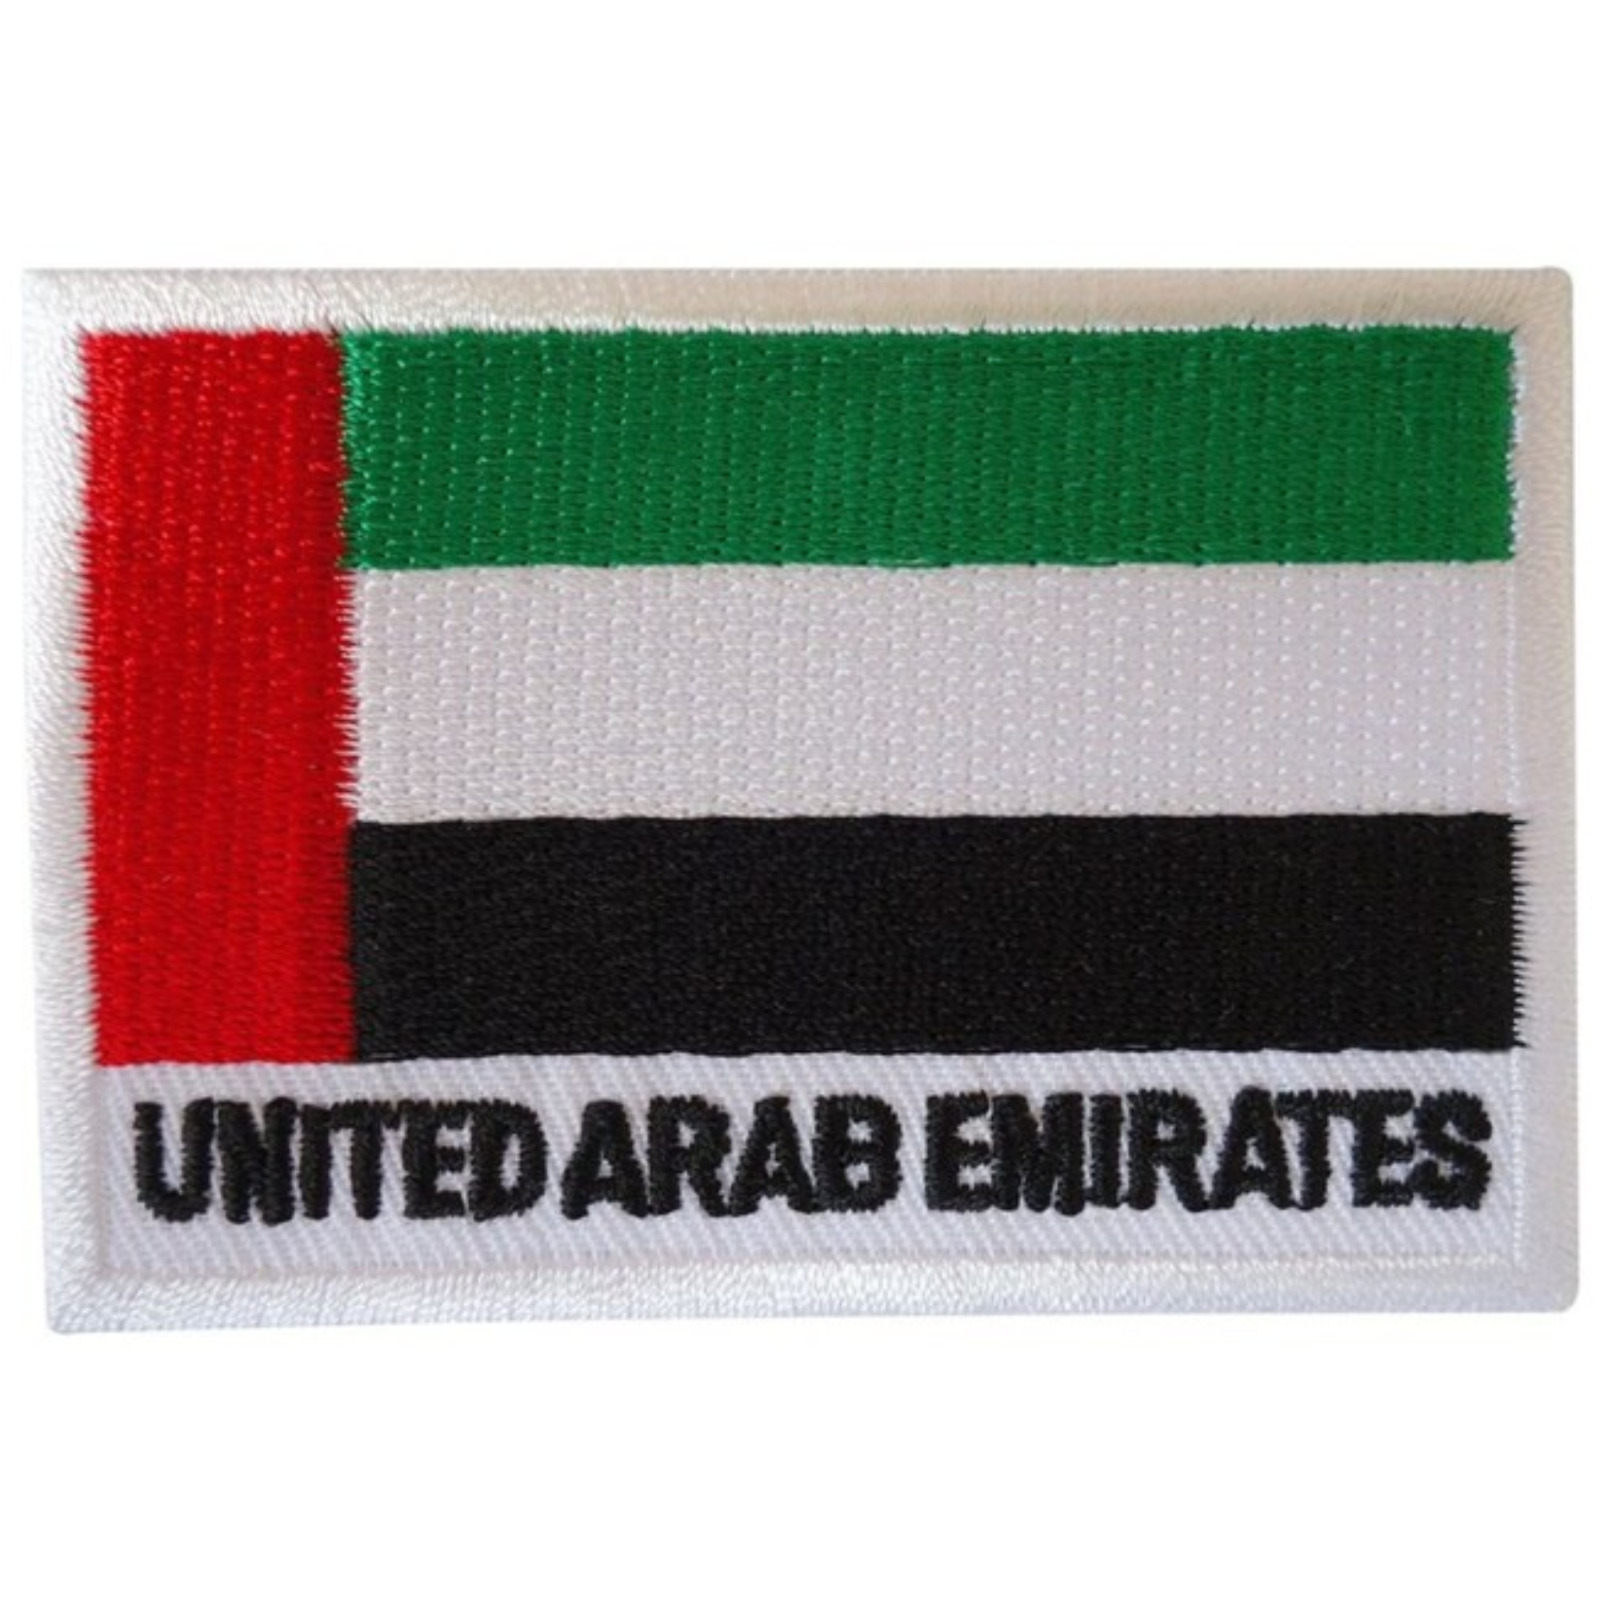 UAE National Country Flag Iron on Patch Embroidered Sew On International